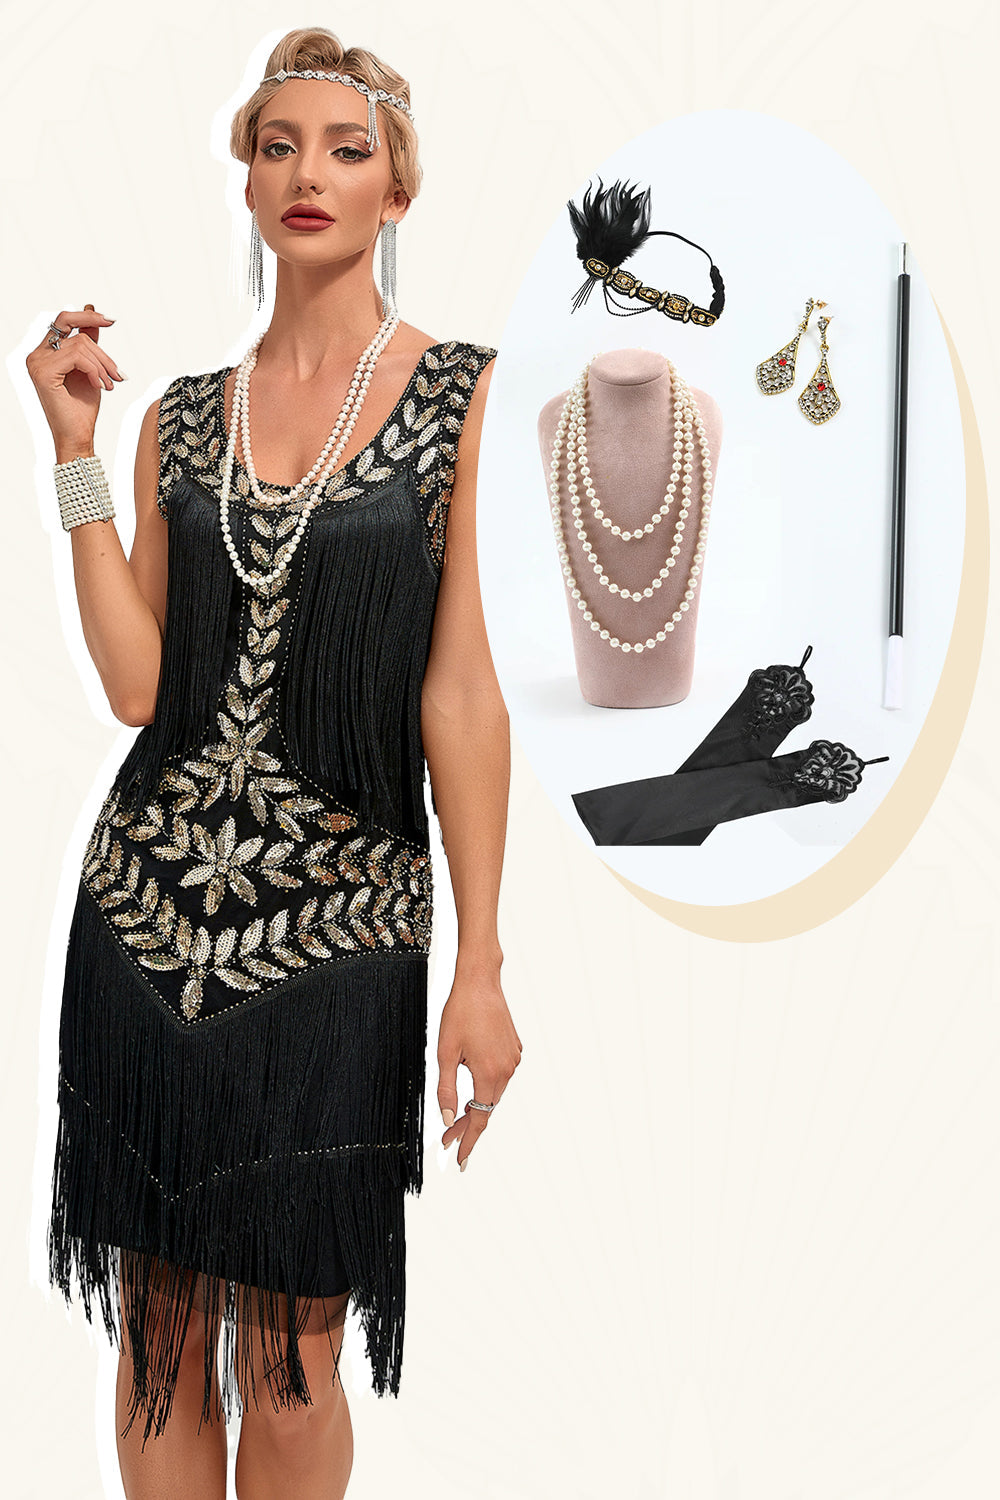 Glitter Black Sequins Fringed 1920s Gatsby Dress with Accessories Set